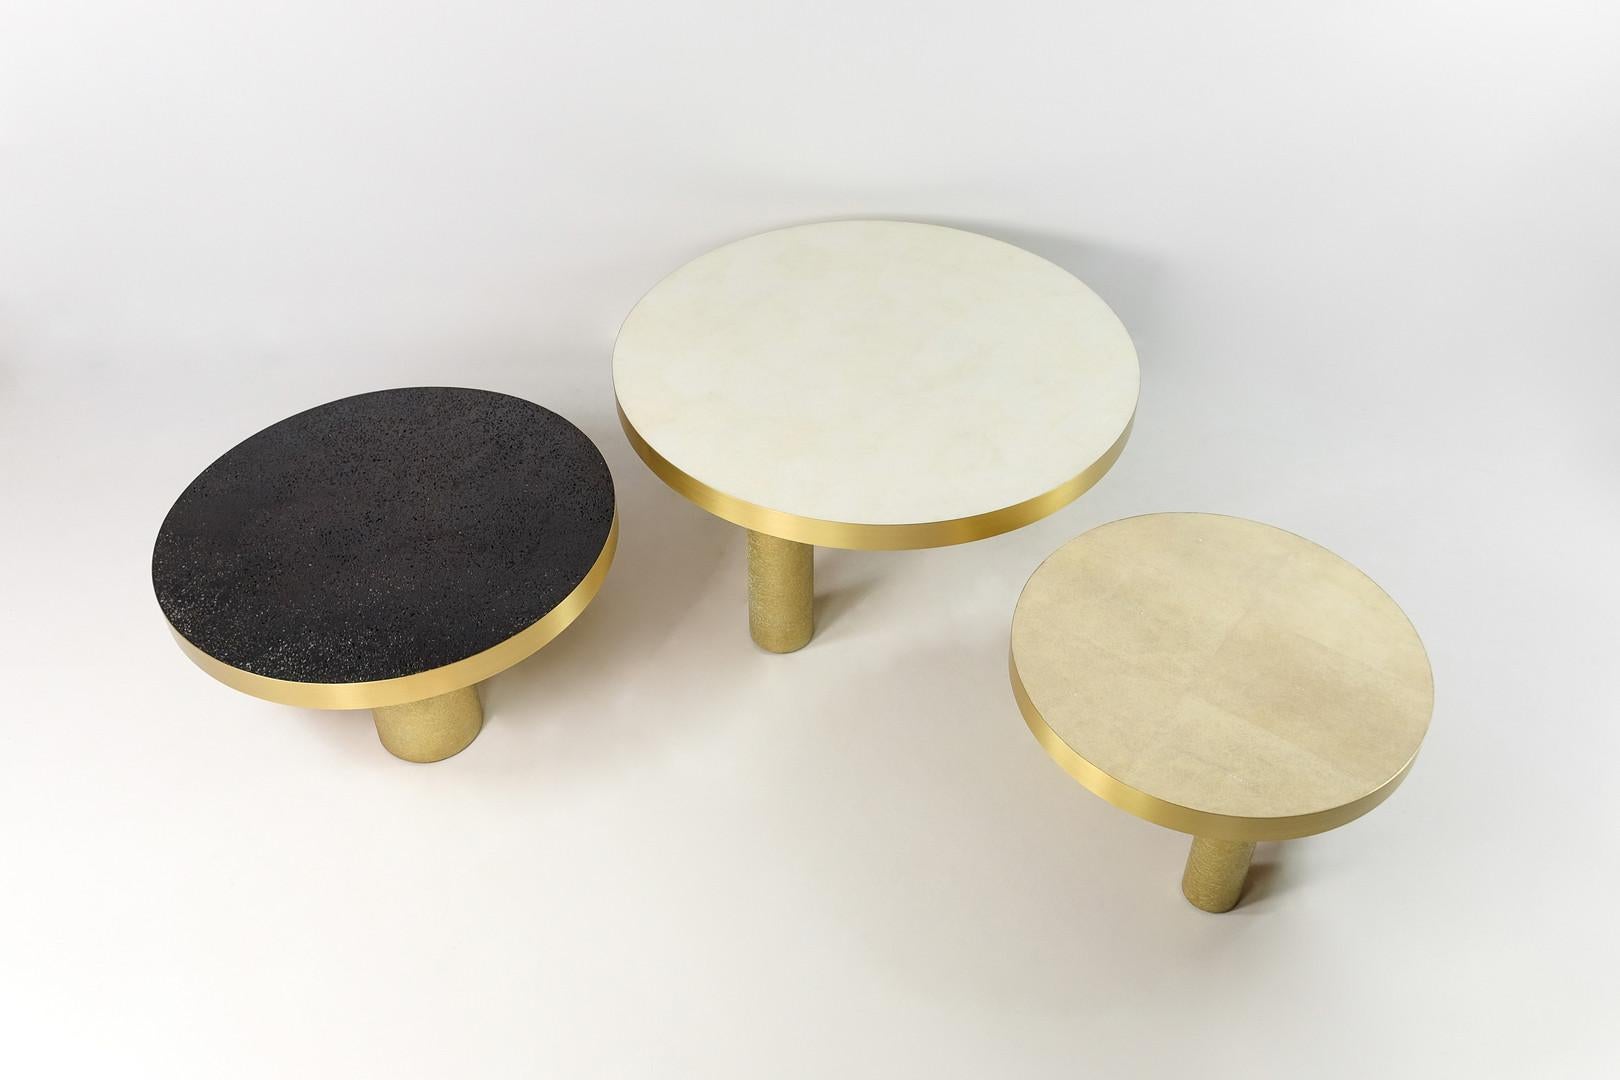 French Set of 3 Coffee Tables in Rock Crystal, Shagreen and Lava Stone by Ginger Brown